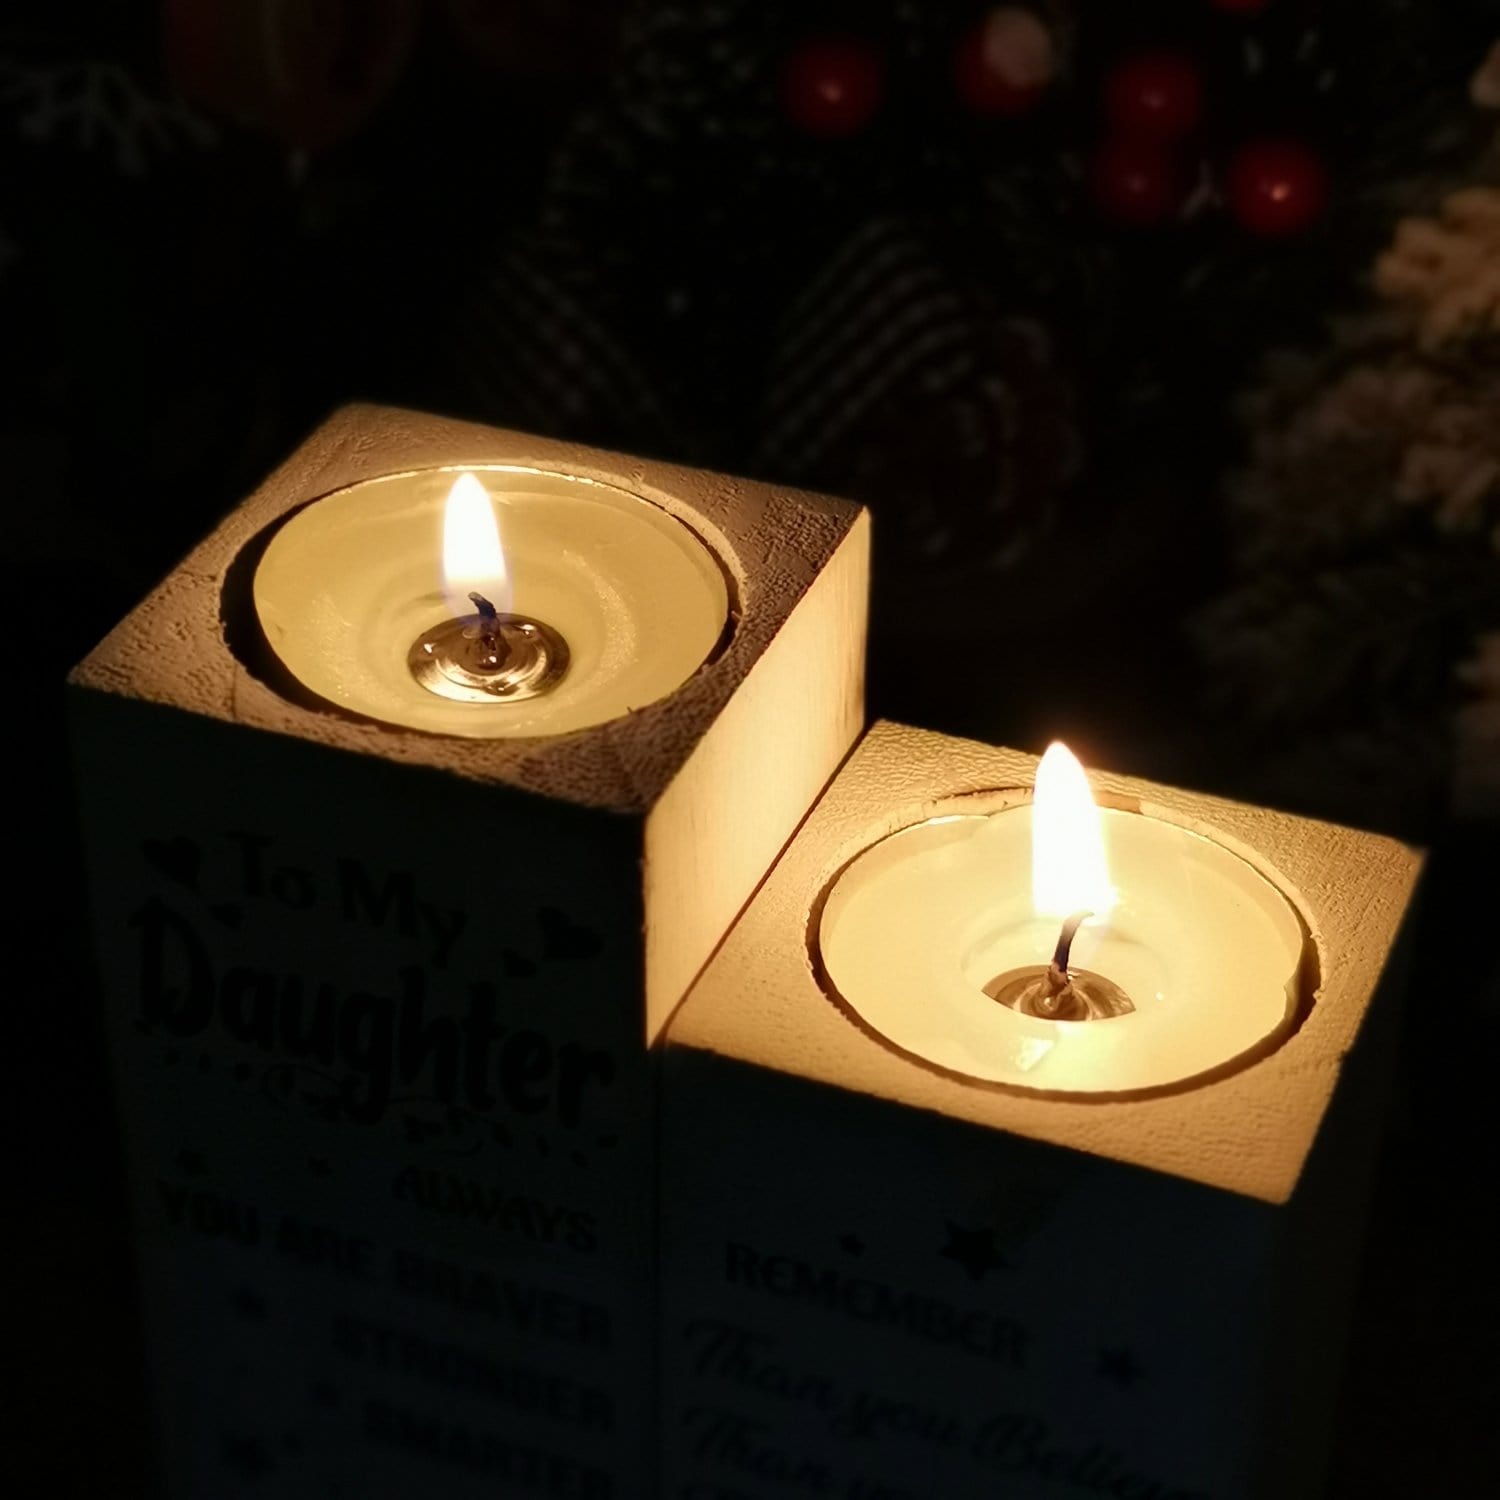 Candle Holders To Our Grandson - You Are Loved More Than You Know Wooden Candle Holders GiveMe-Gifts